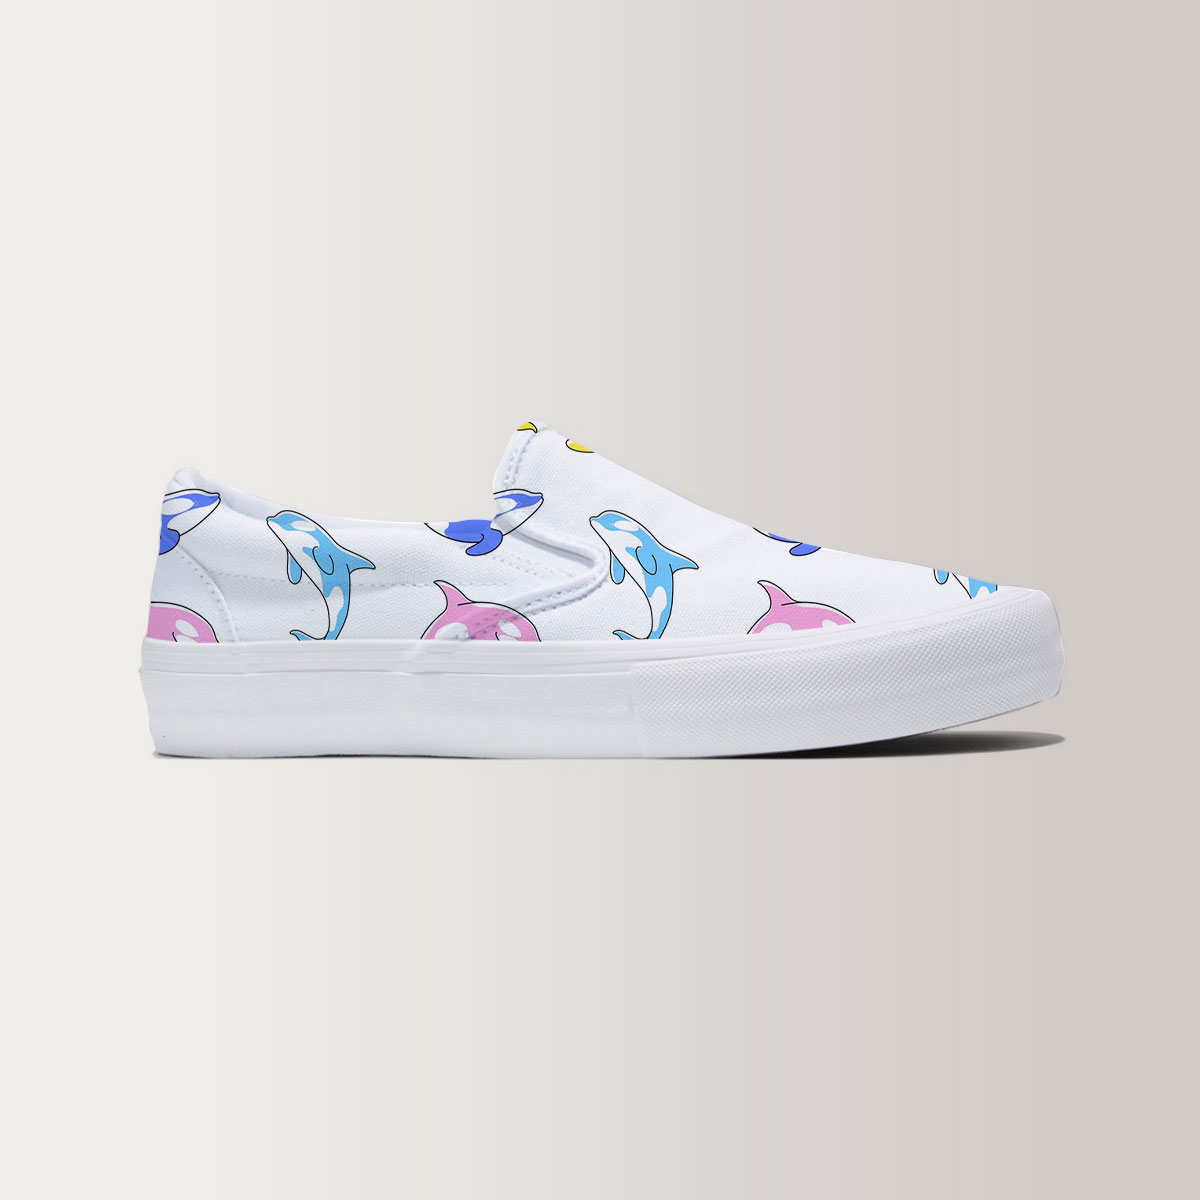 Colorful Orca Whale Slip On Sneakers